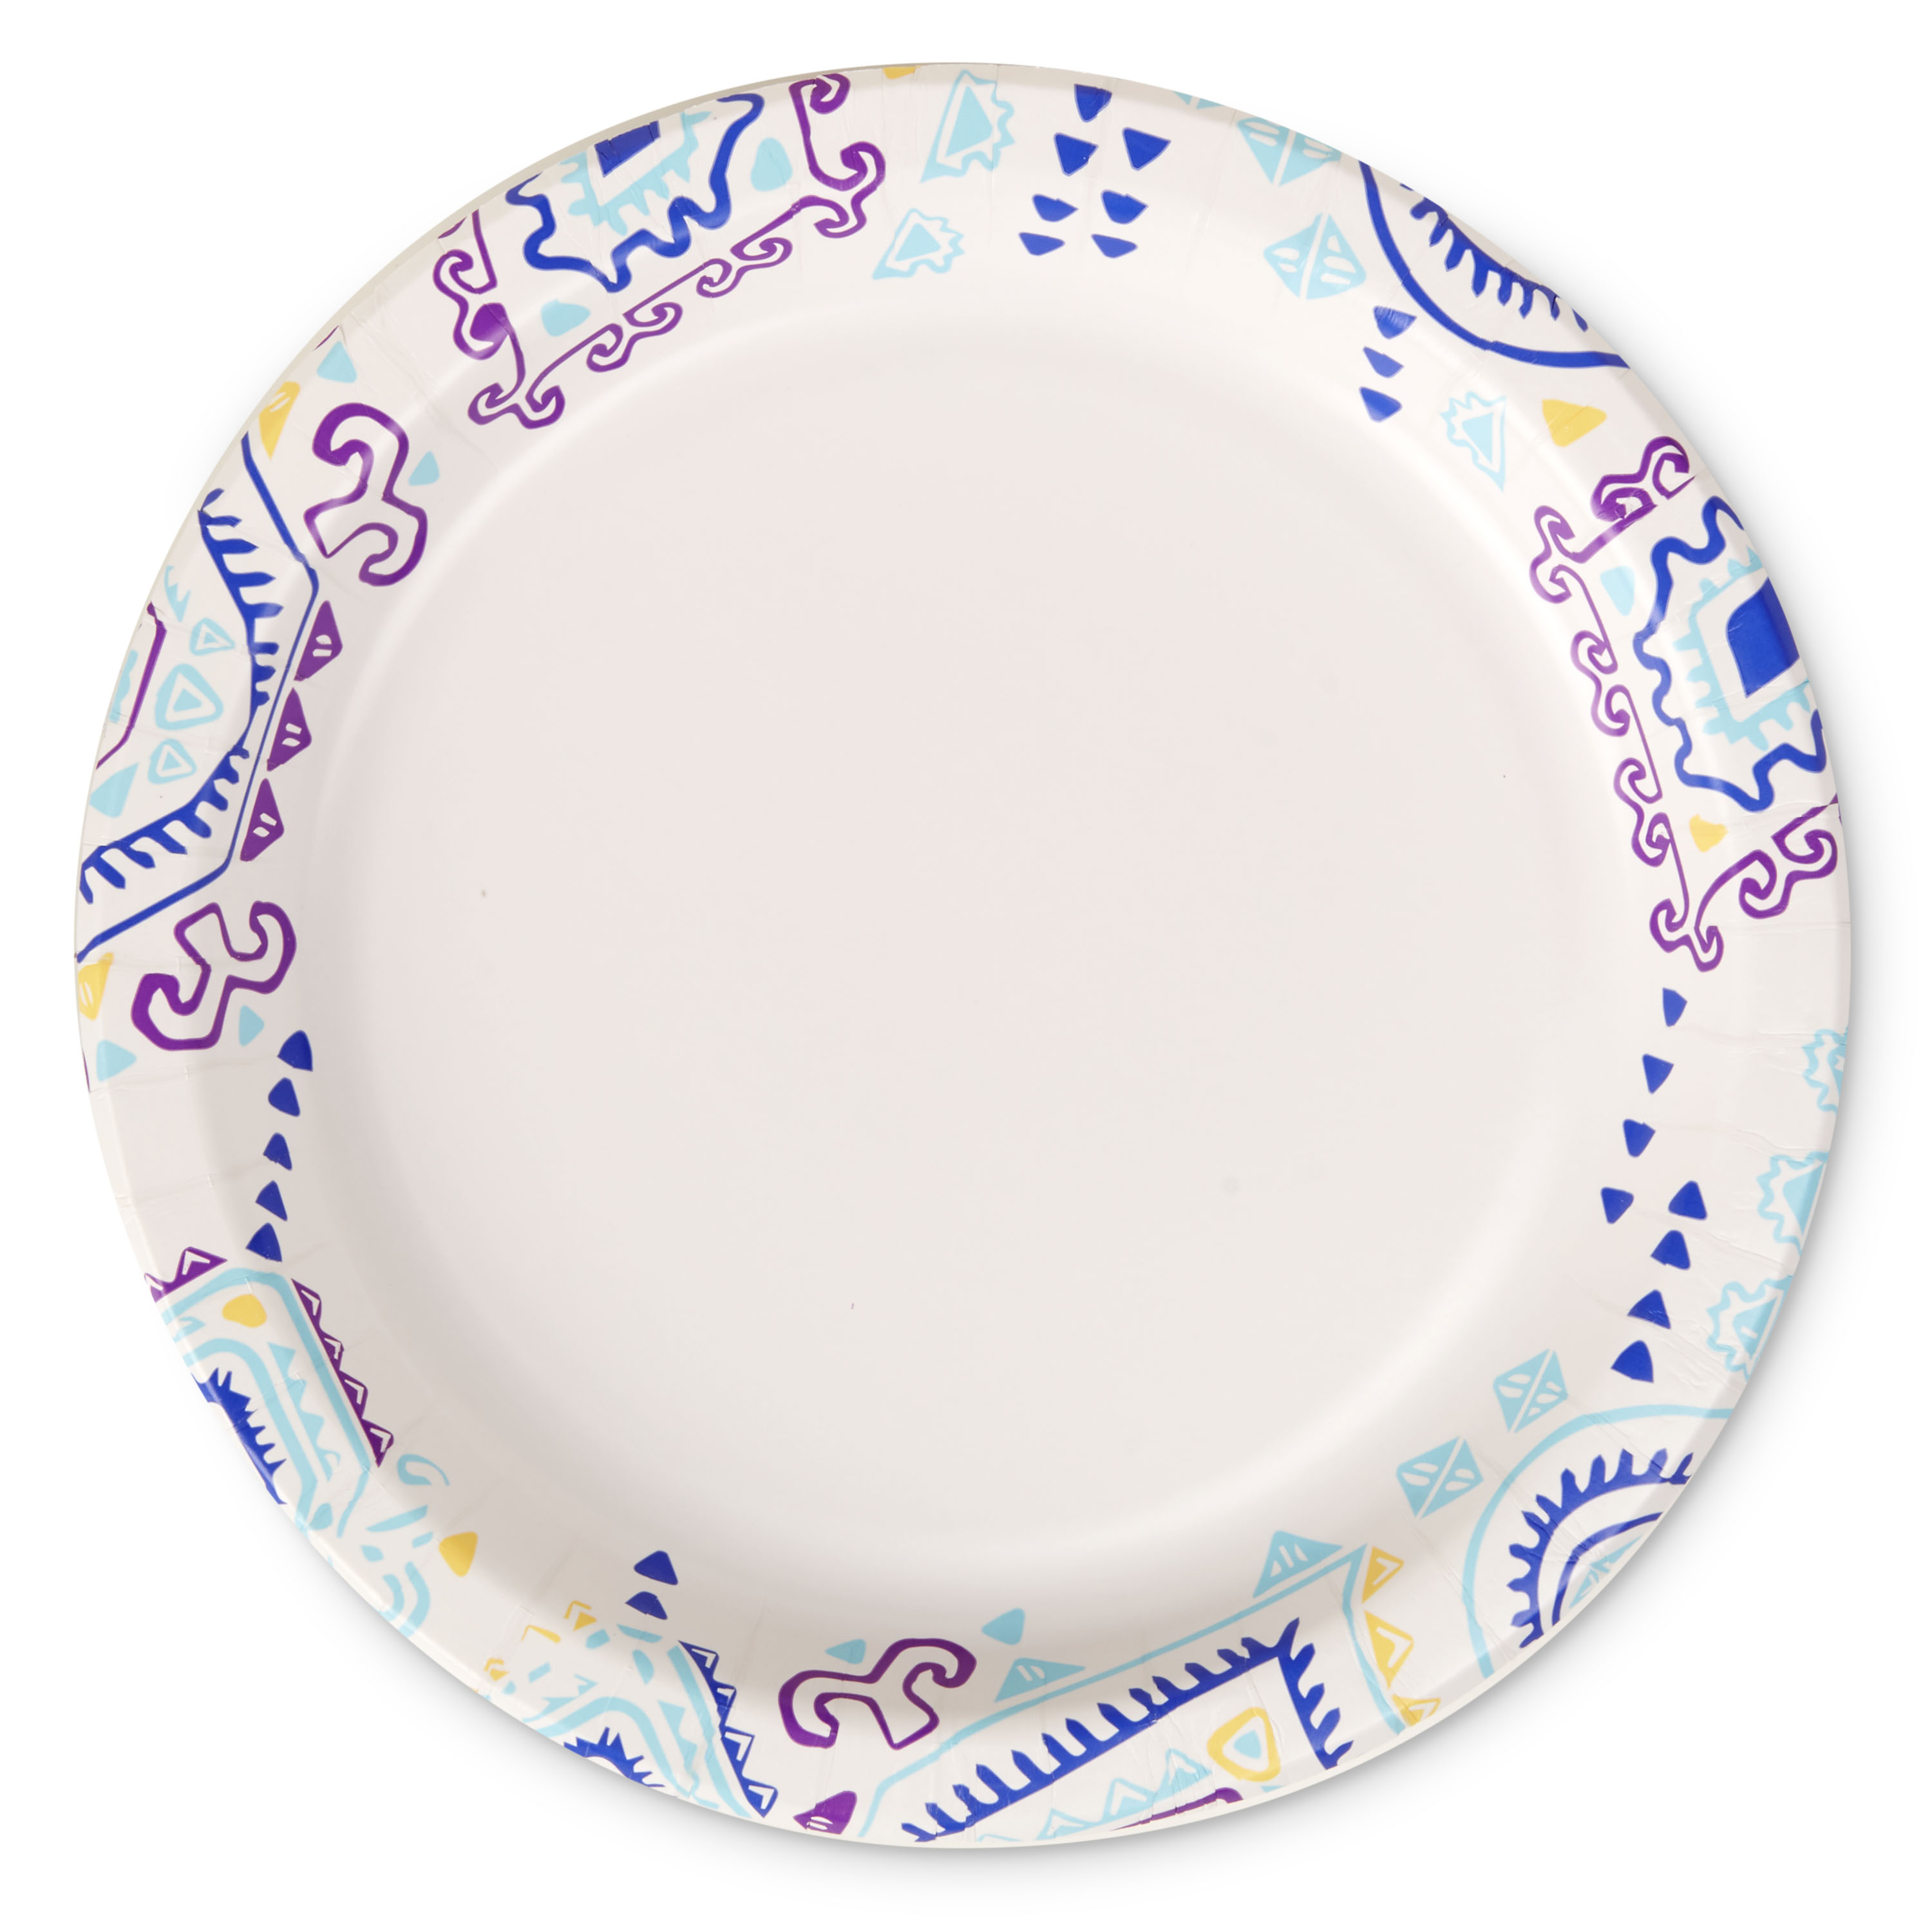 Great Value Everyday Paper Plates, 8.5", 170 Count - image 3 of 9